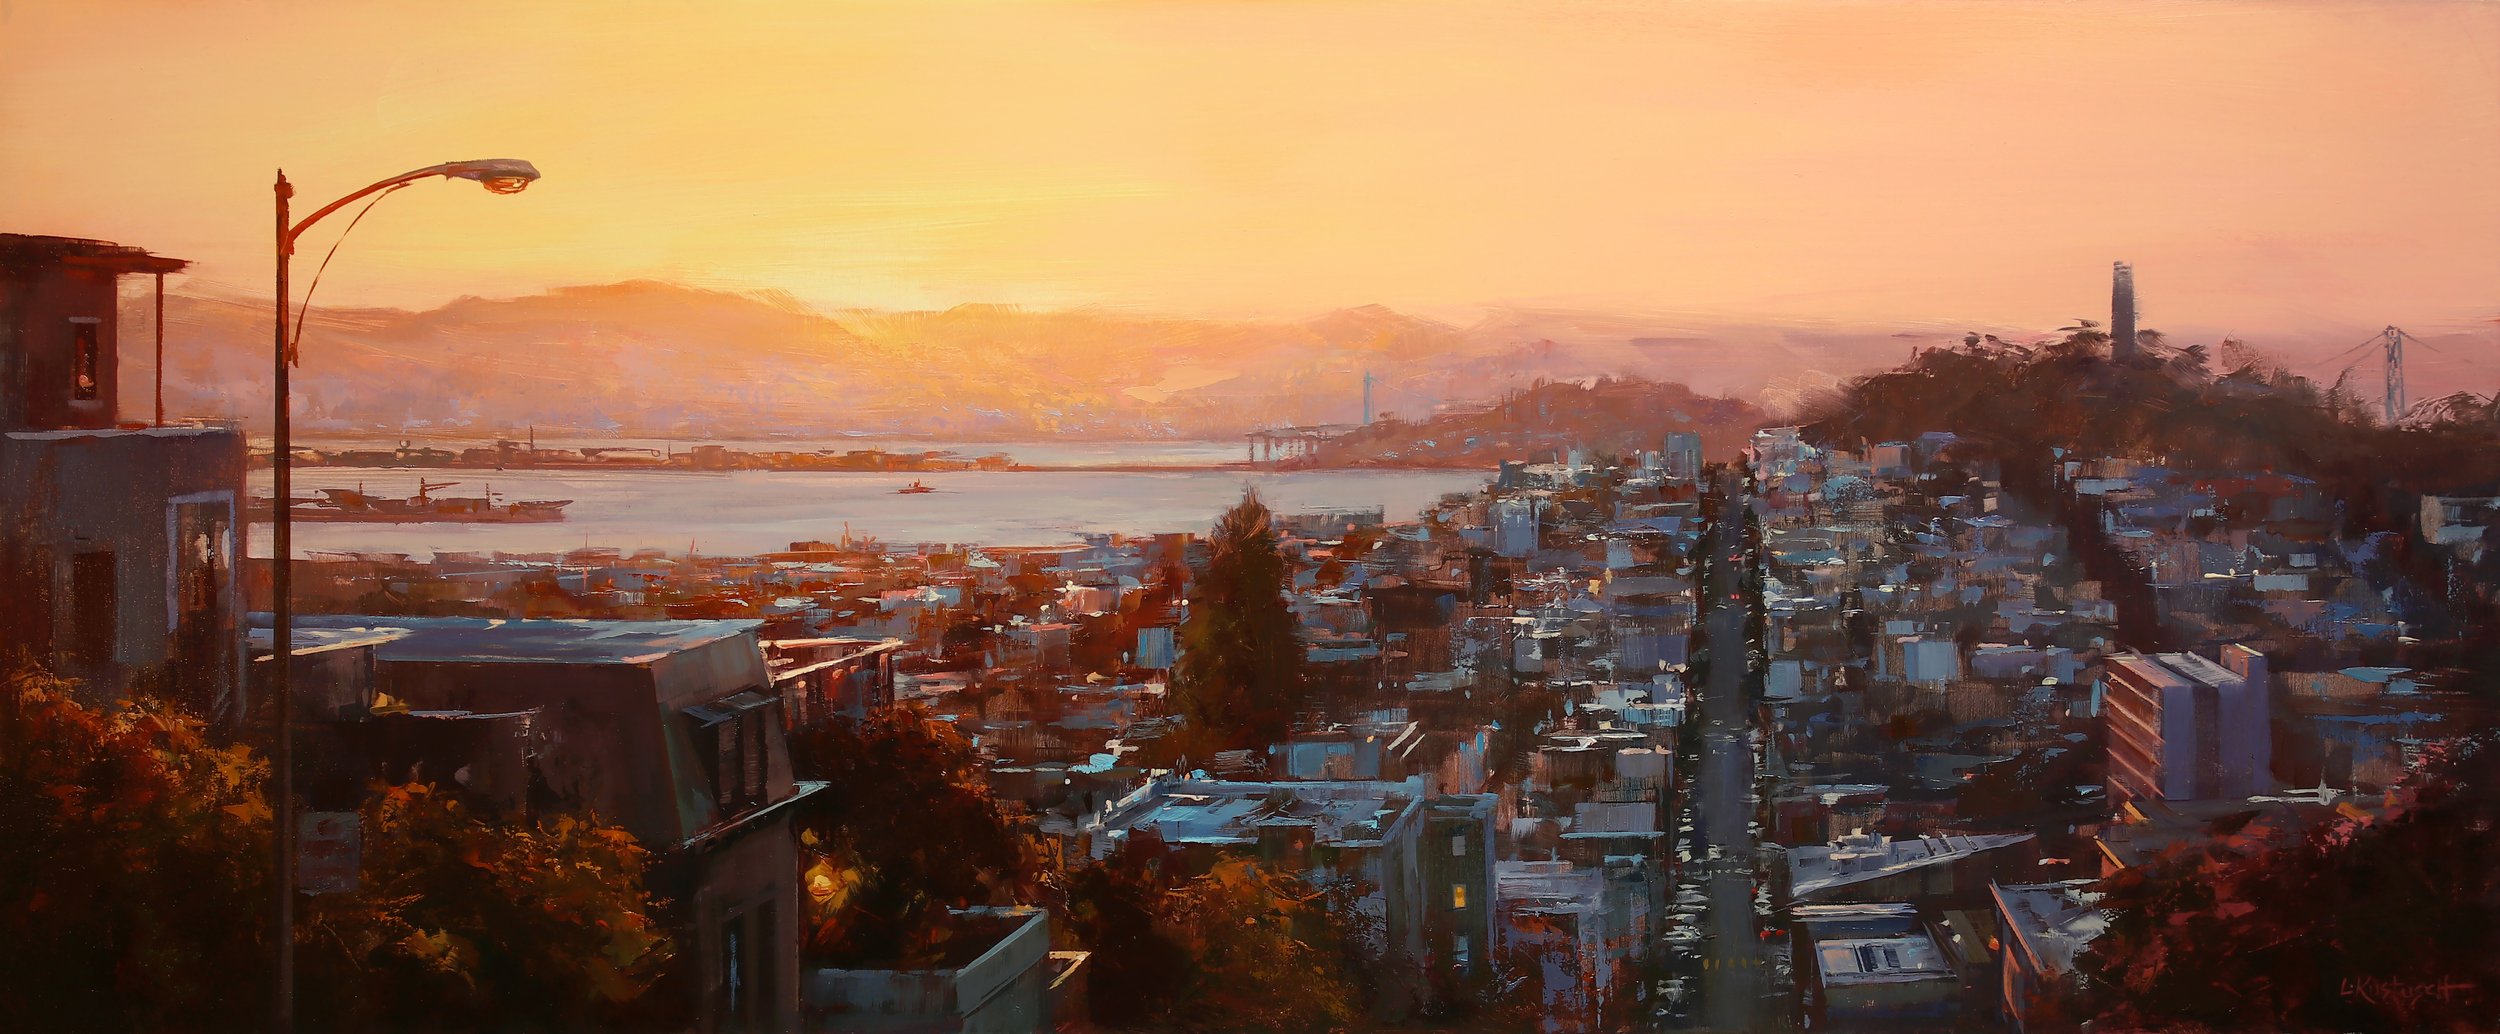 First Light over the Bay by Lindsey Kustusch